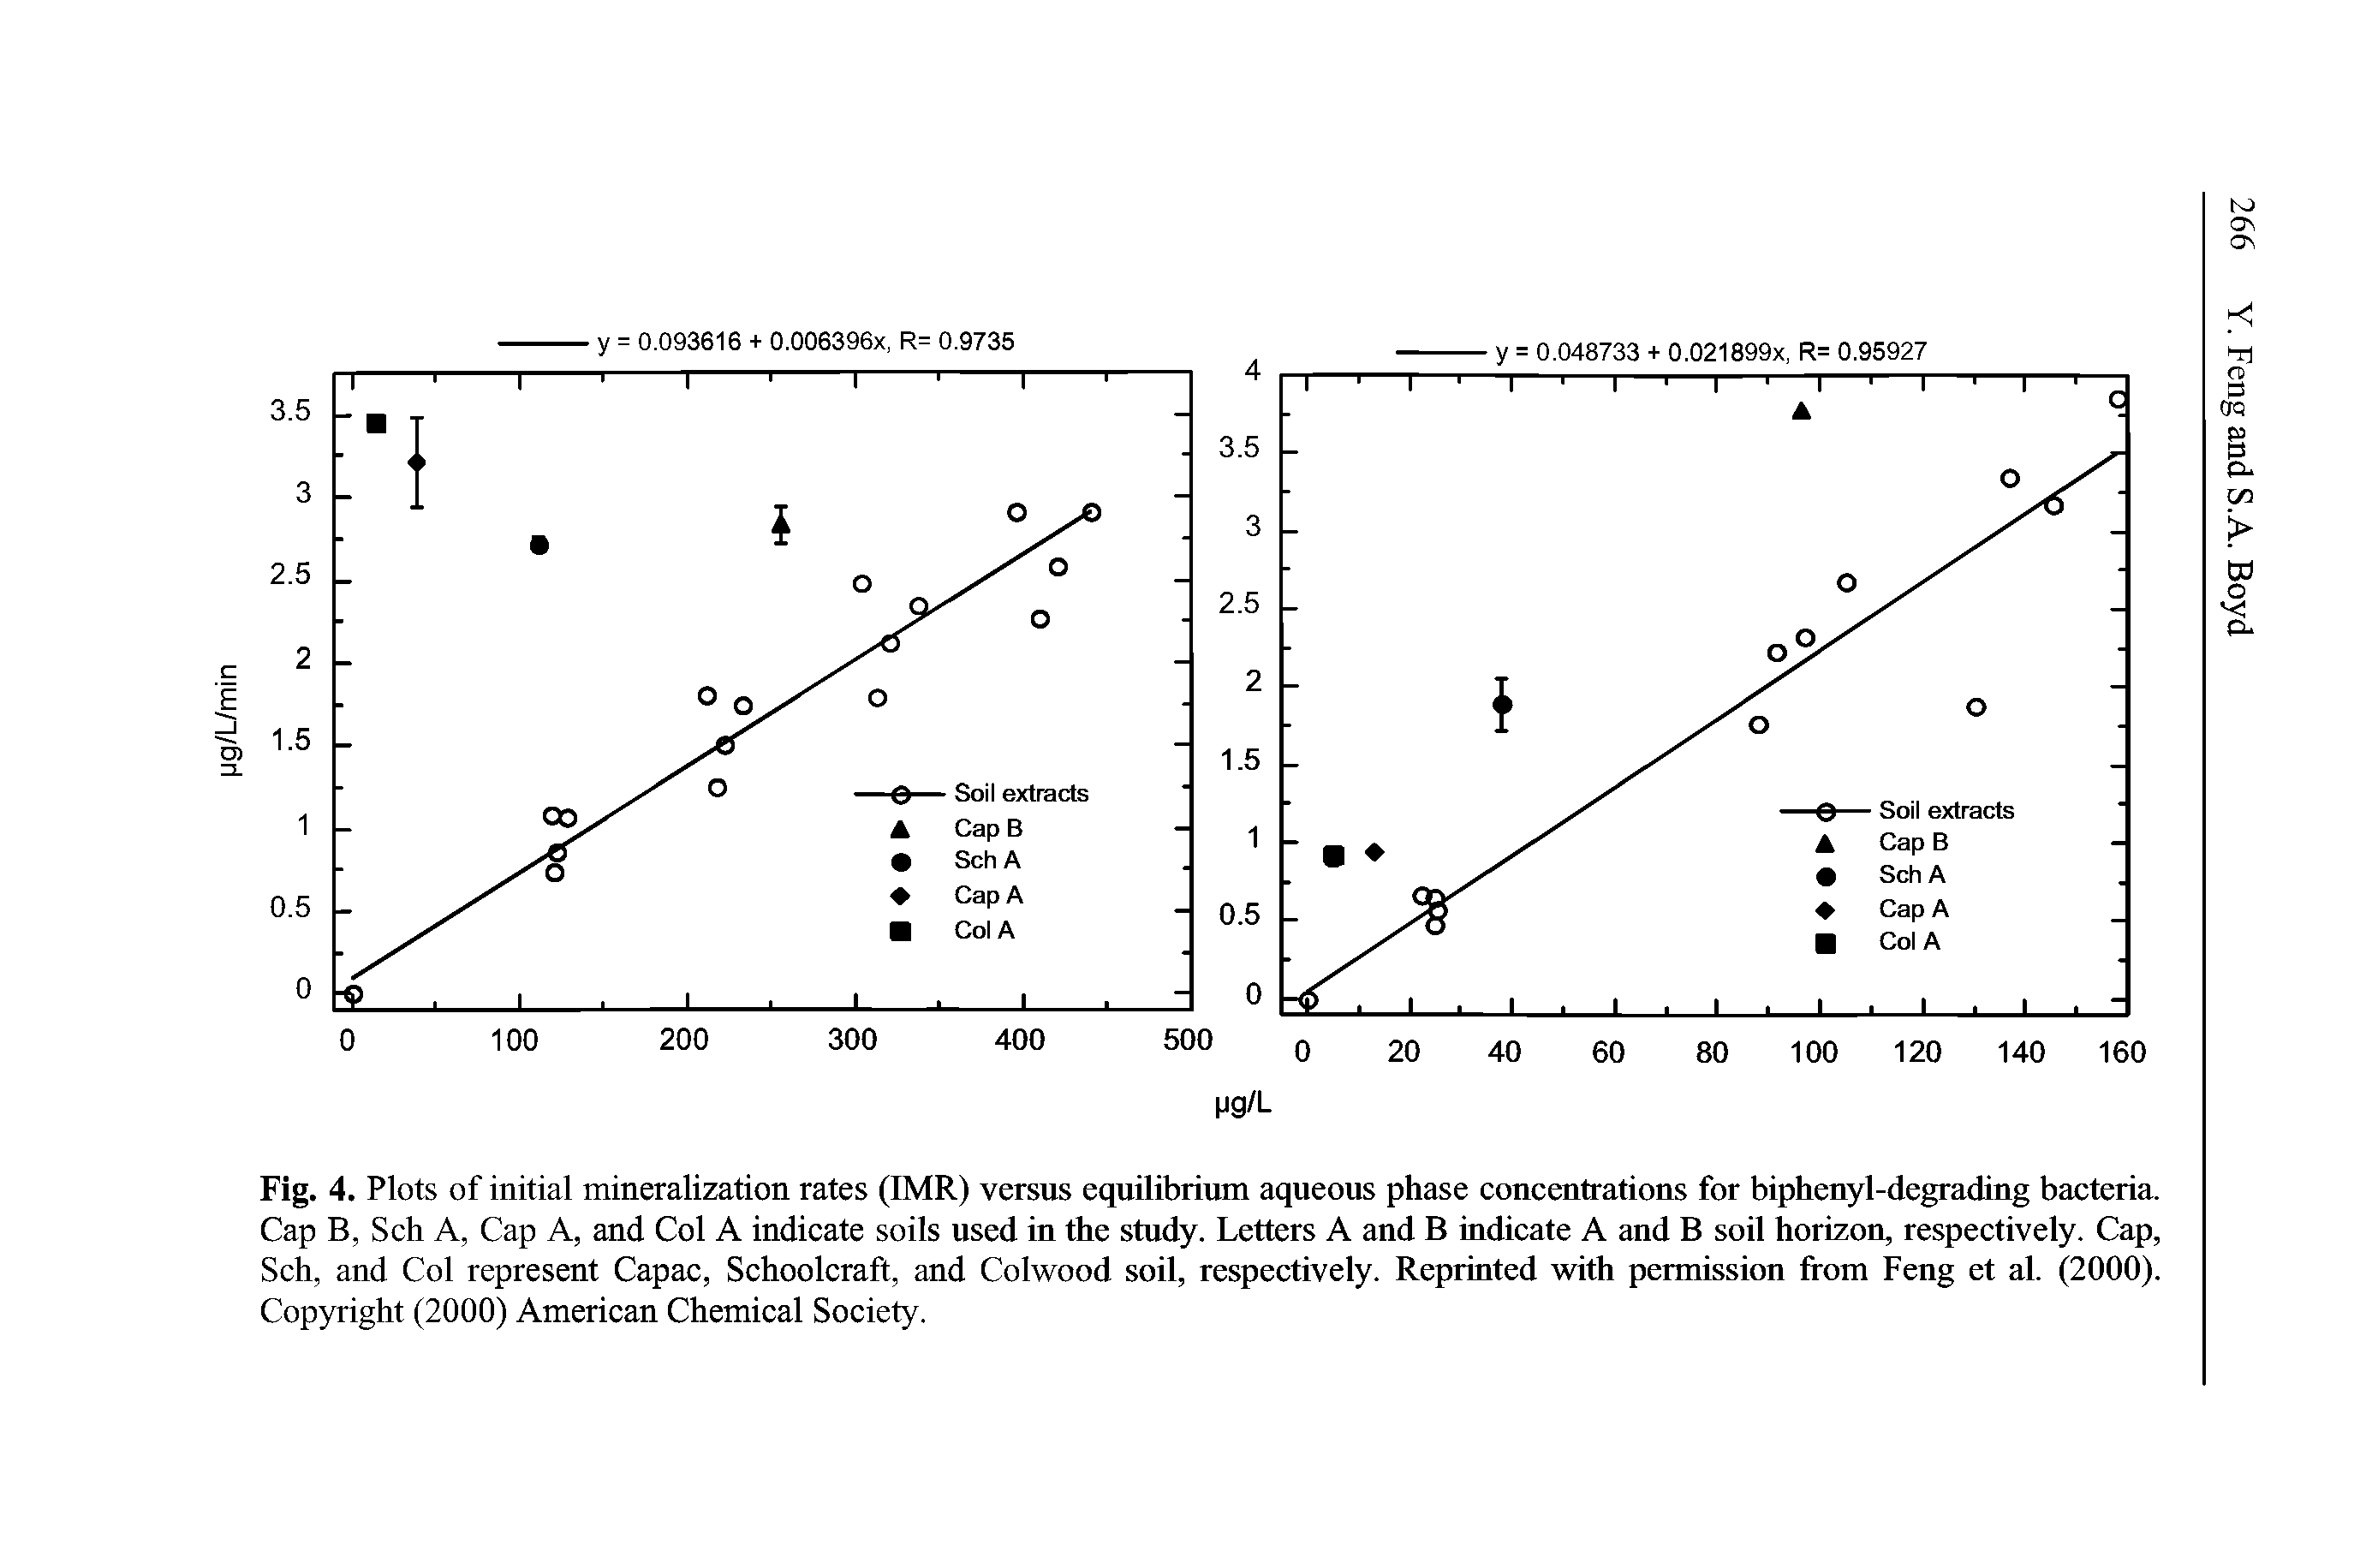 Fig. 4. Plots of initial mineralization rates (IMR) versus equilibrium aqueous phase concentrations for biphenyl-degrading bacteria. Cap B, Sch A, Cap A, and Col A indicate soils used in the study. Letters A and B indicate A and B soil horizon, respectively. Cap, Sch, and Col represent Capac, Schoolcraft, and Colwood soil, respectively. Reprinted with permission from Feng et al. (2000). Copyright (2000) American Chemical Society.